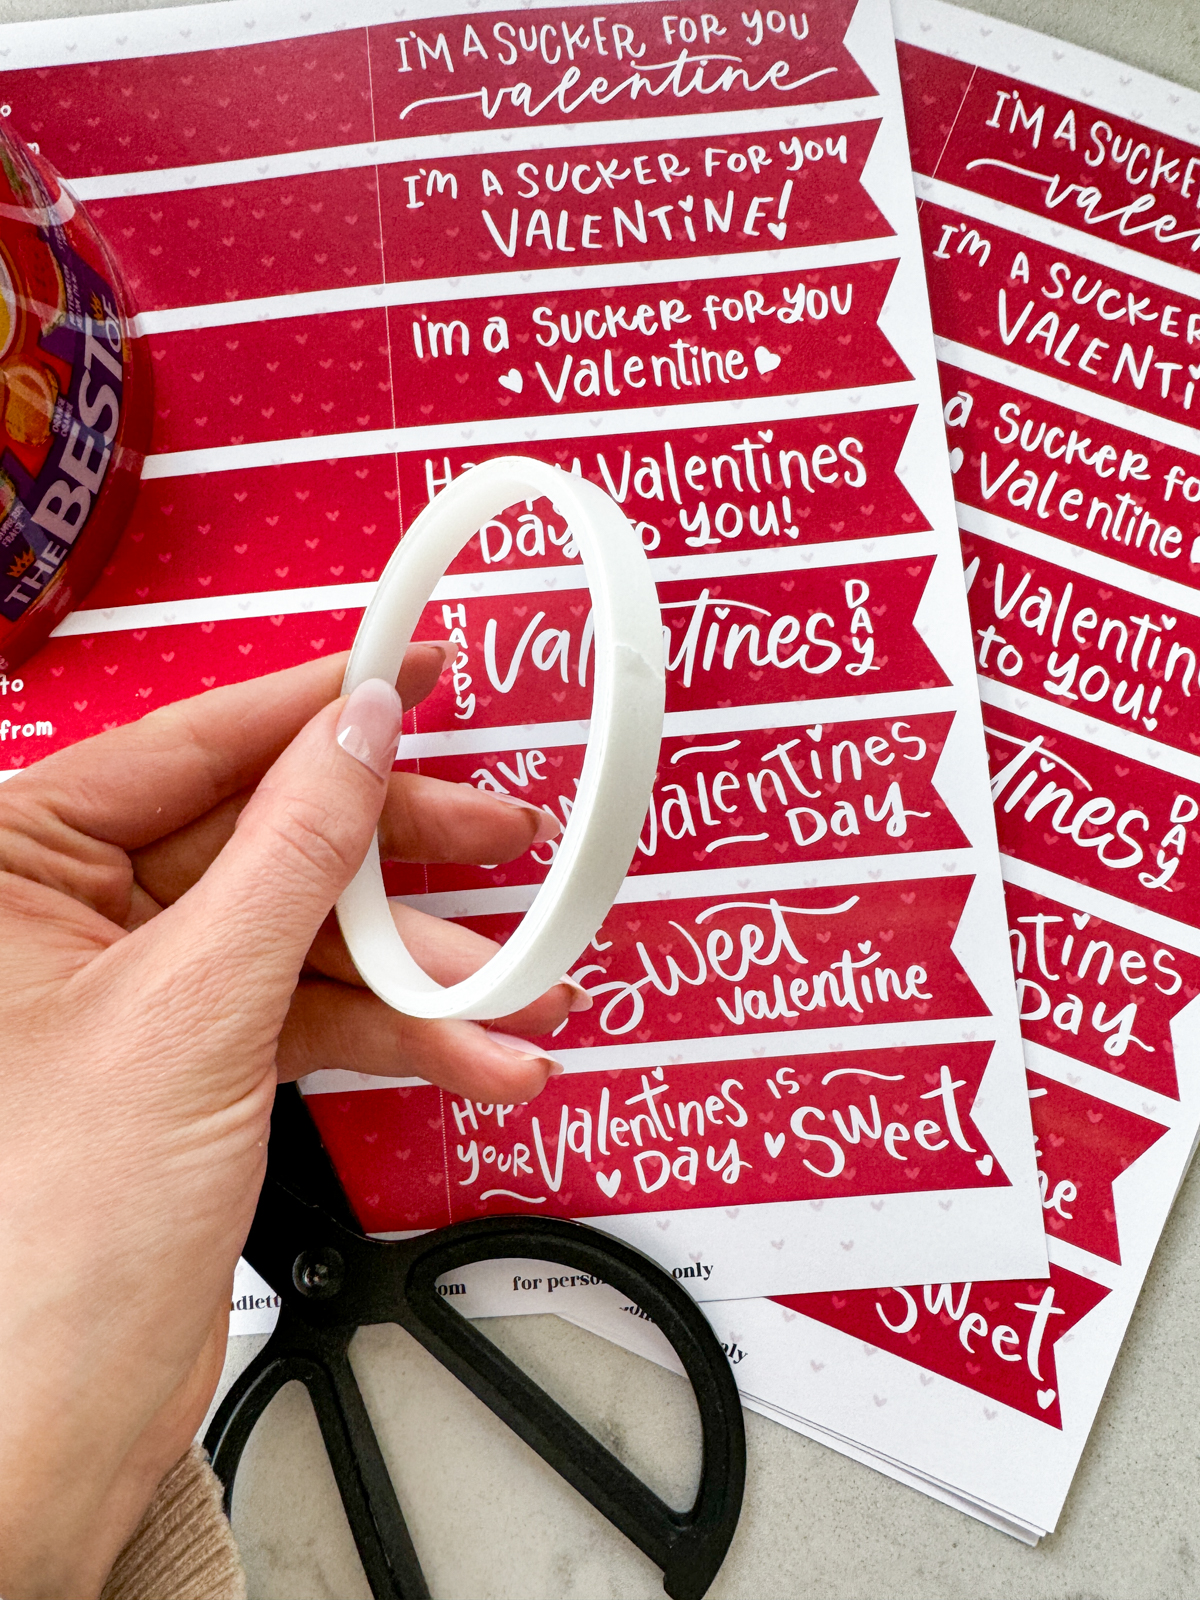 image of roll of double sided tape held over printed sucker tags for valentines day